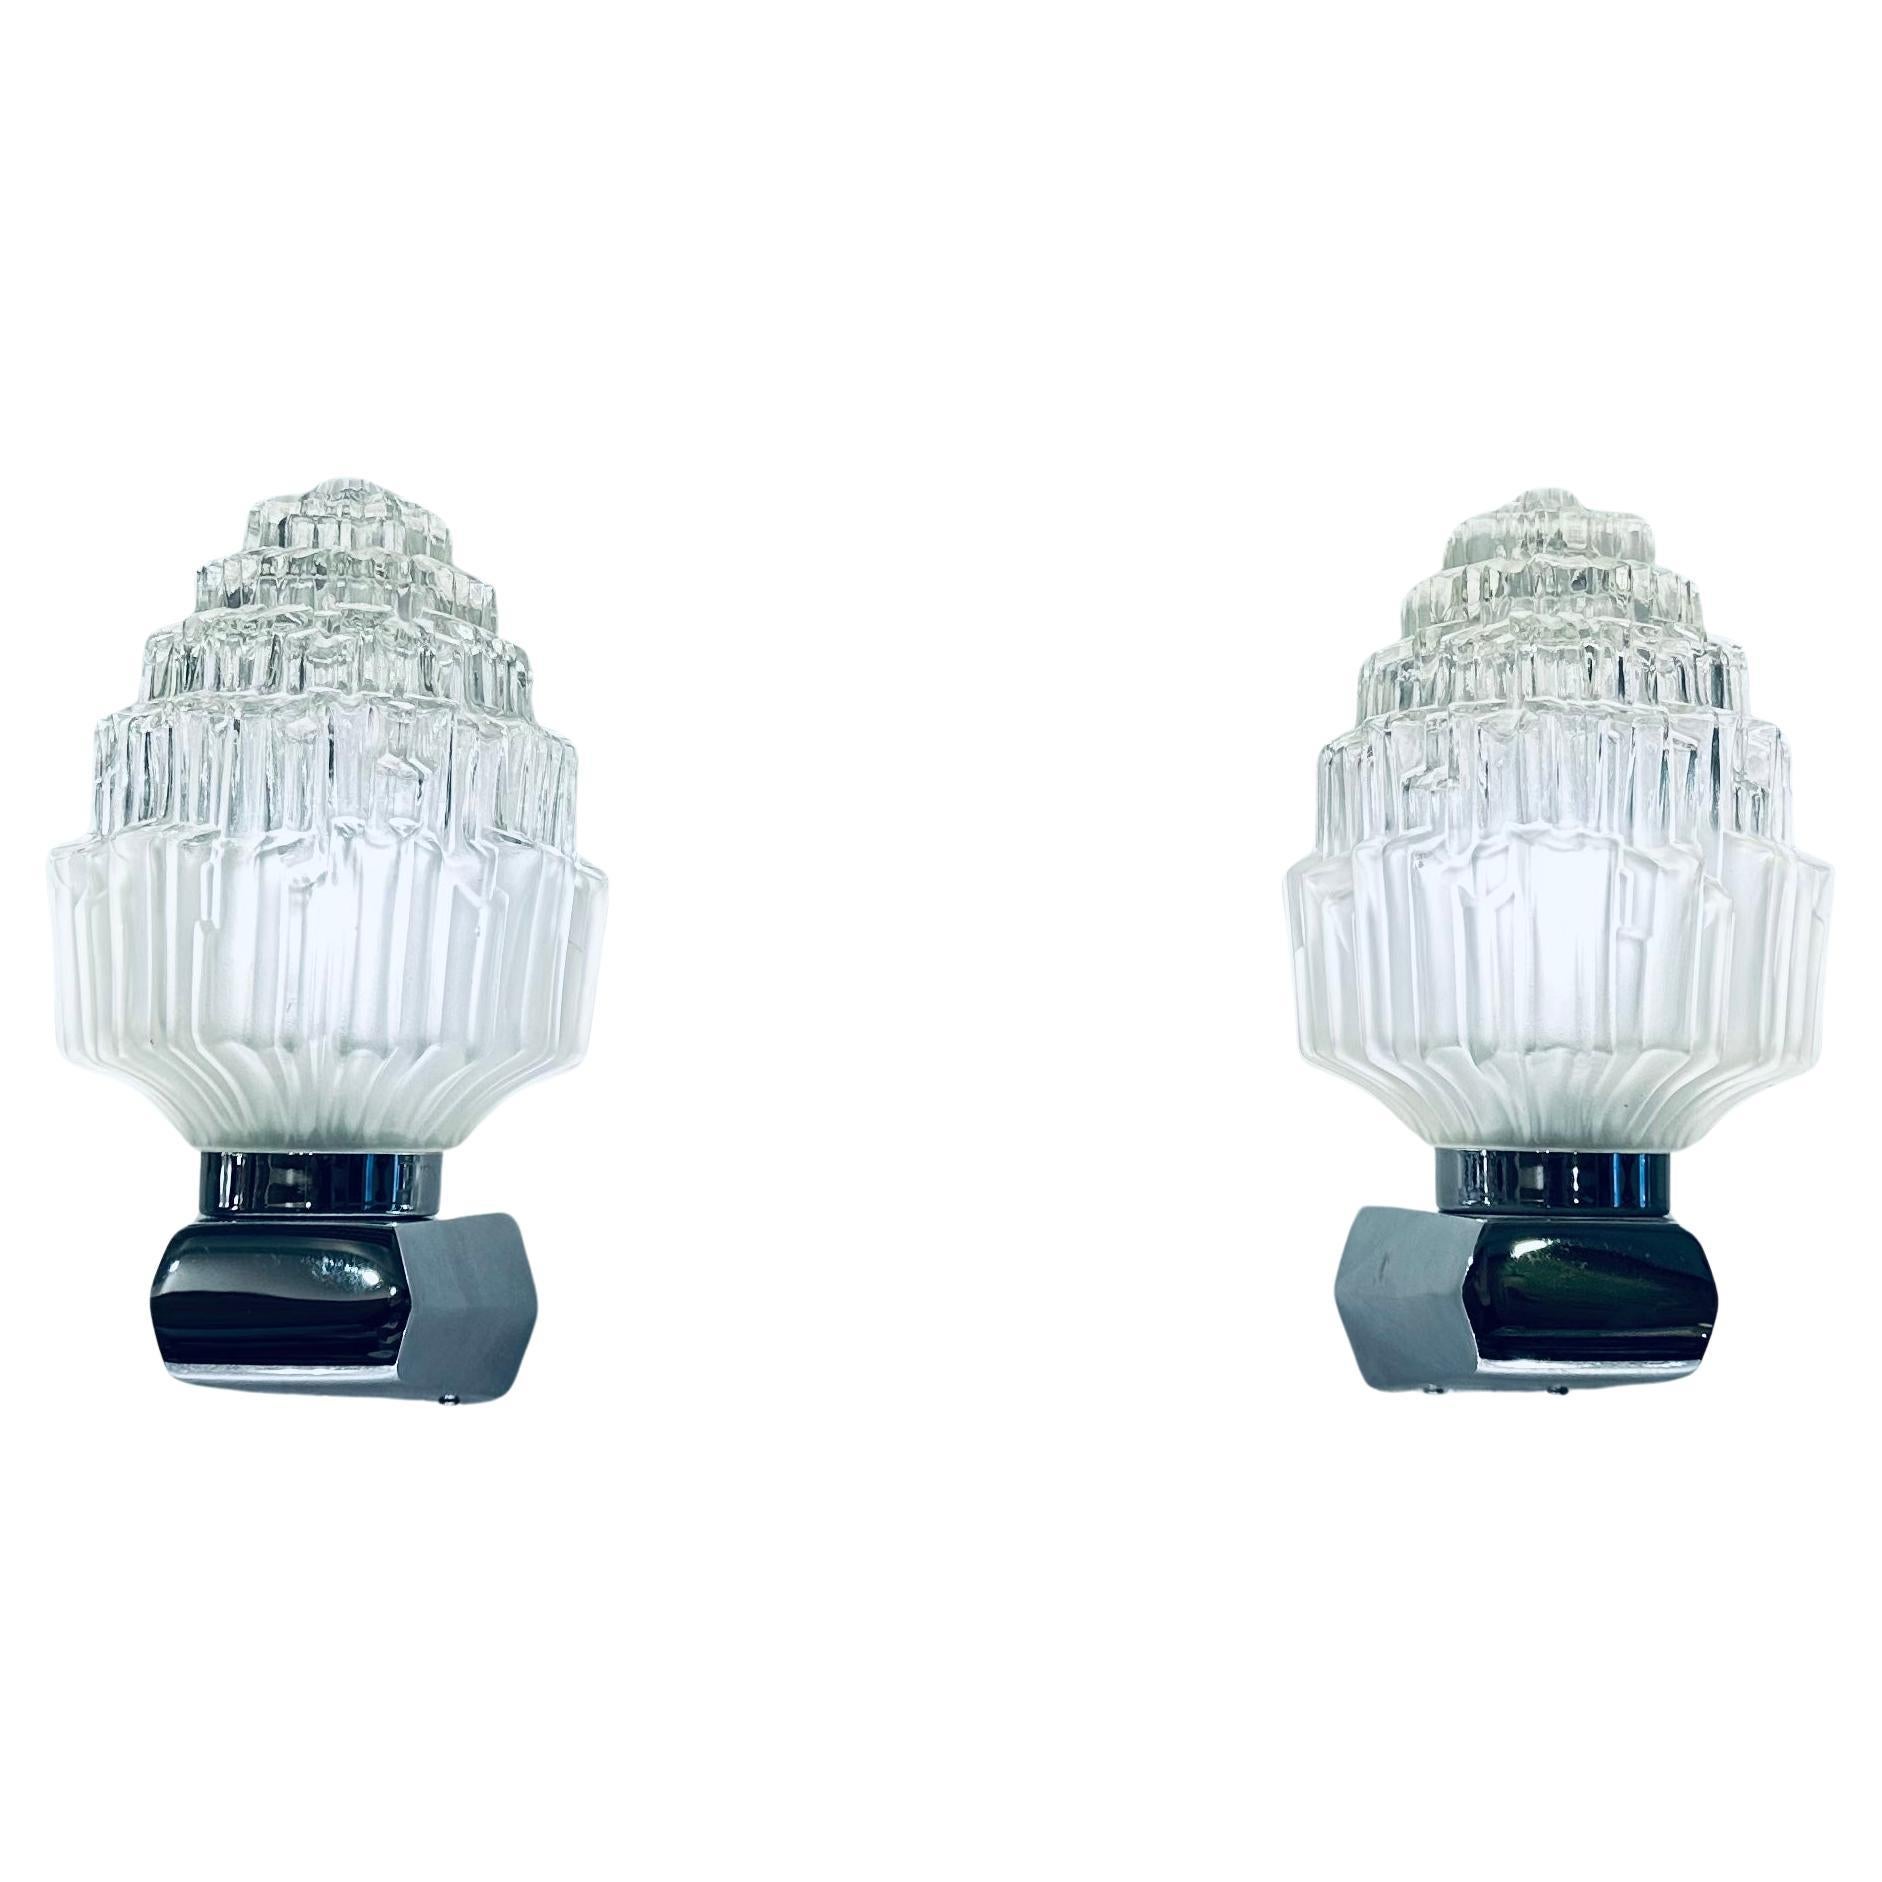 Pair of 1950s EJS Lighting Glass & Polished Chrome Torch Wall Lights or Sconces For Sale